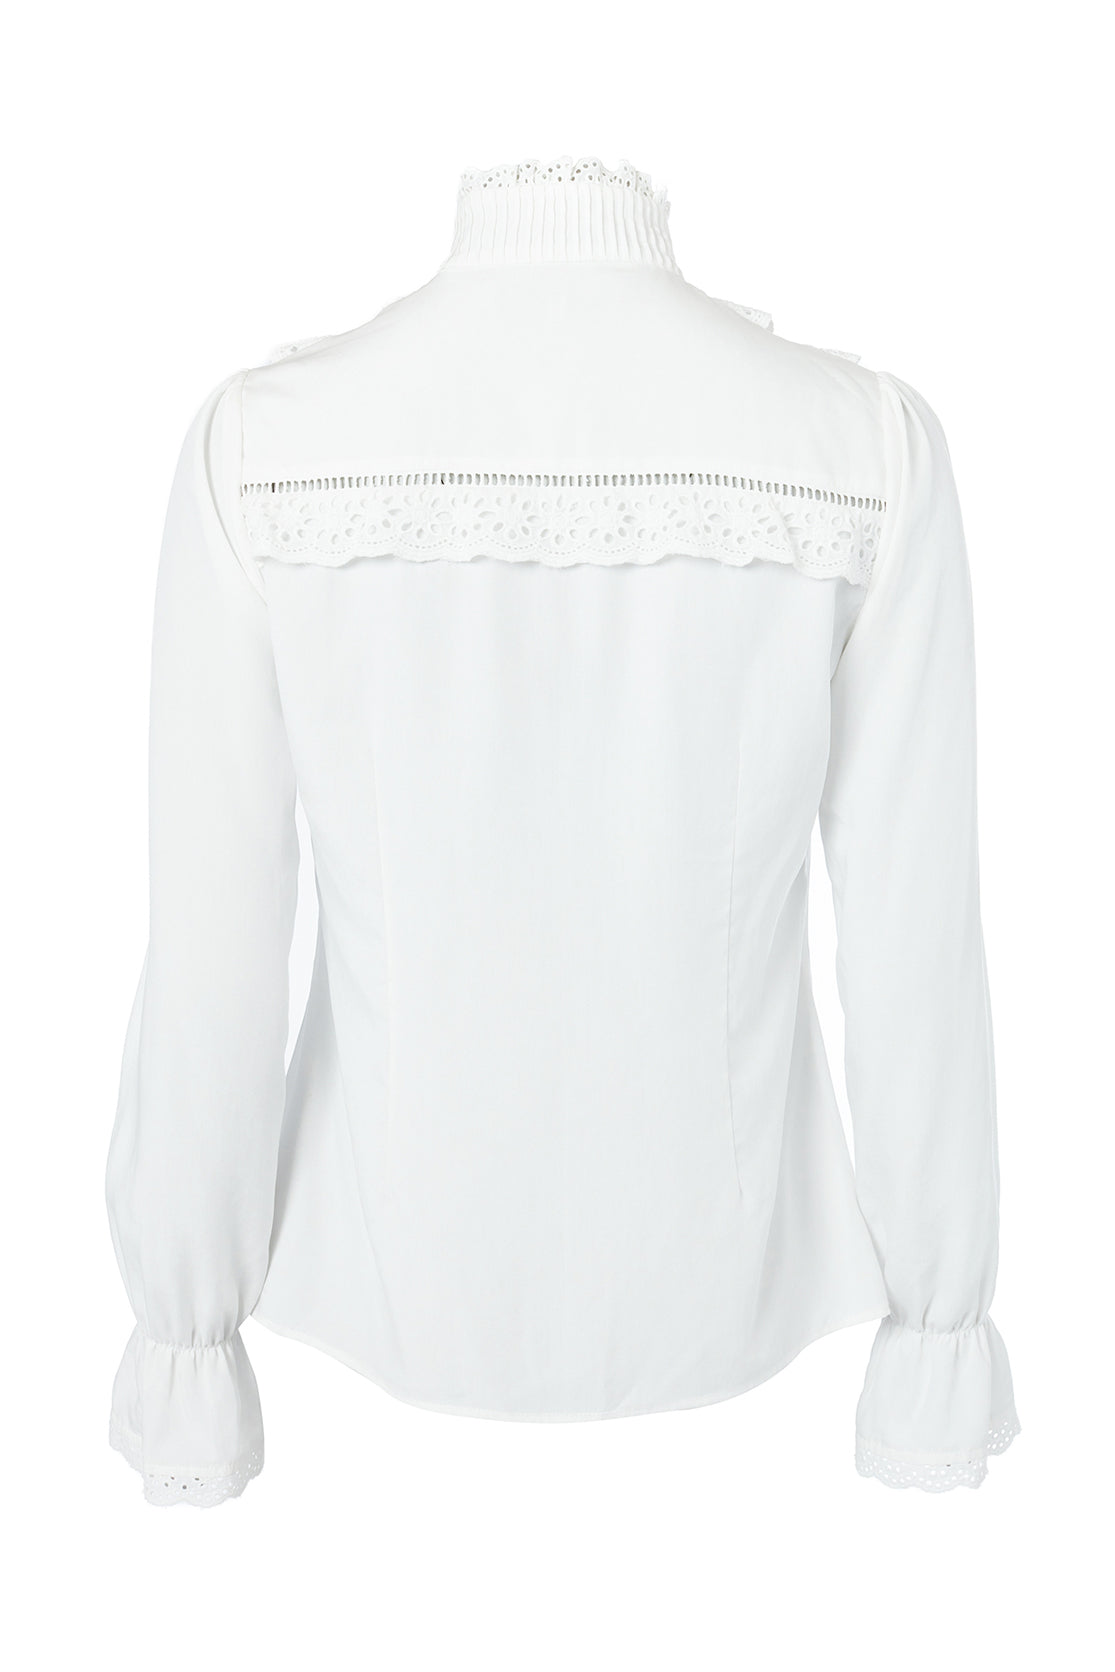 back image of white blouse with long sleeves and a slim fit with delicate lace trim to both the collar and cuff edges with flattering lace details to the front body